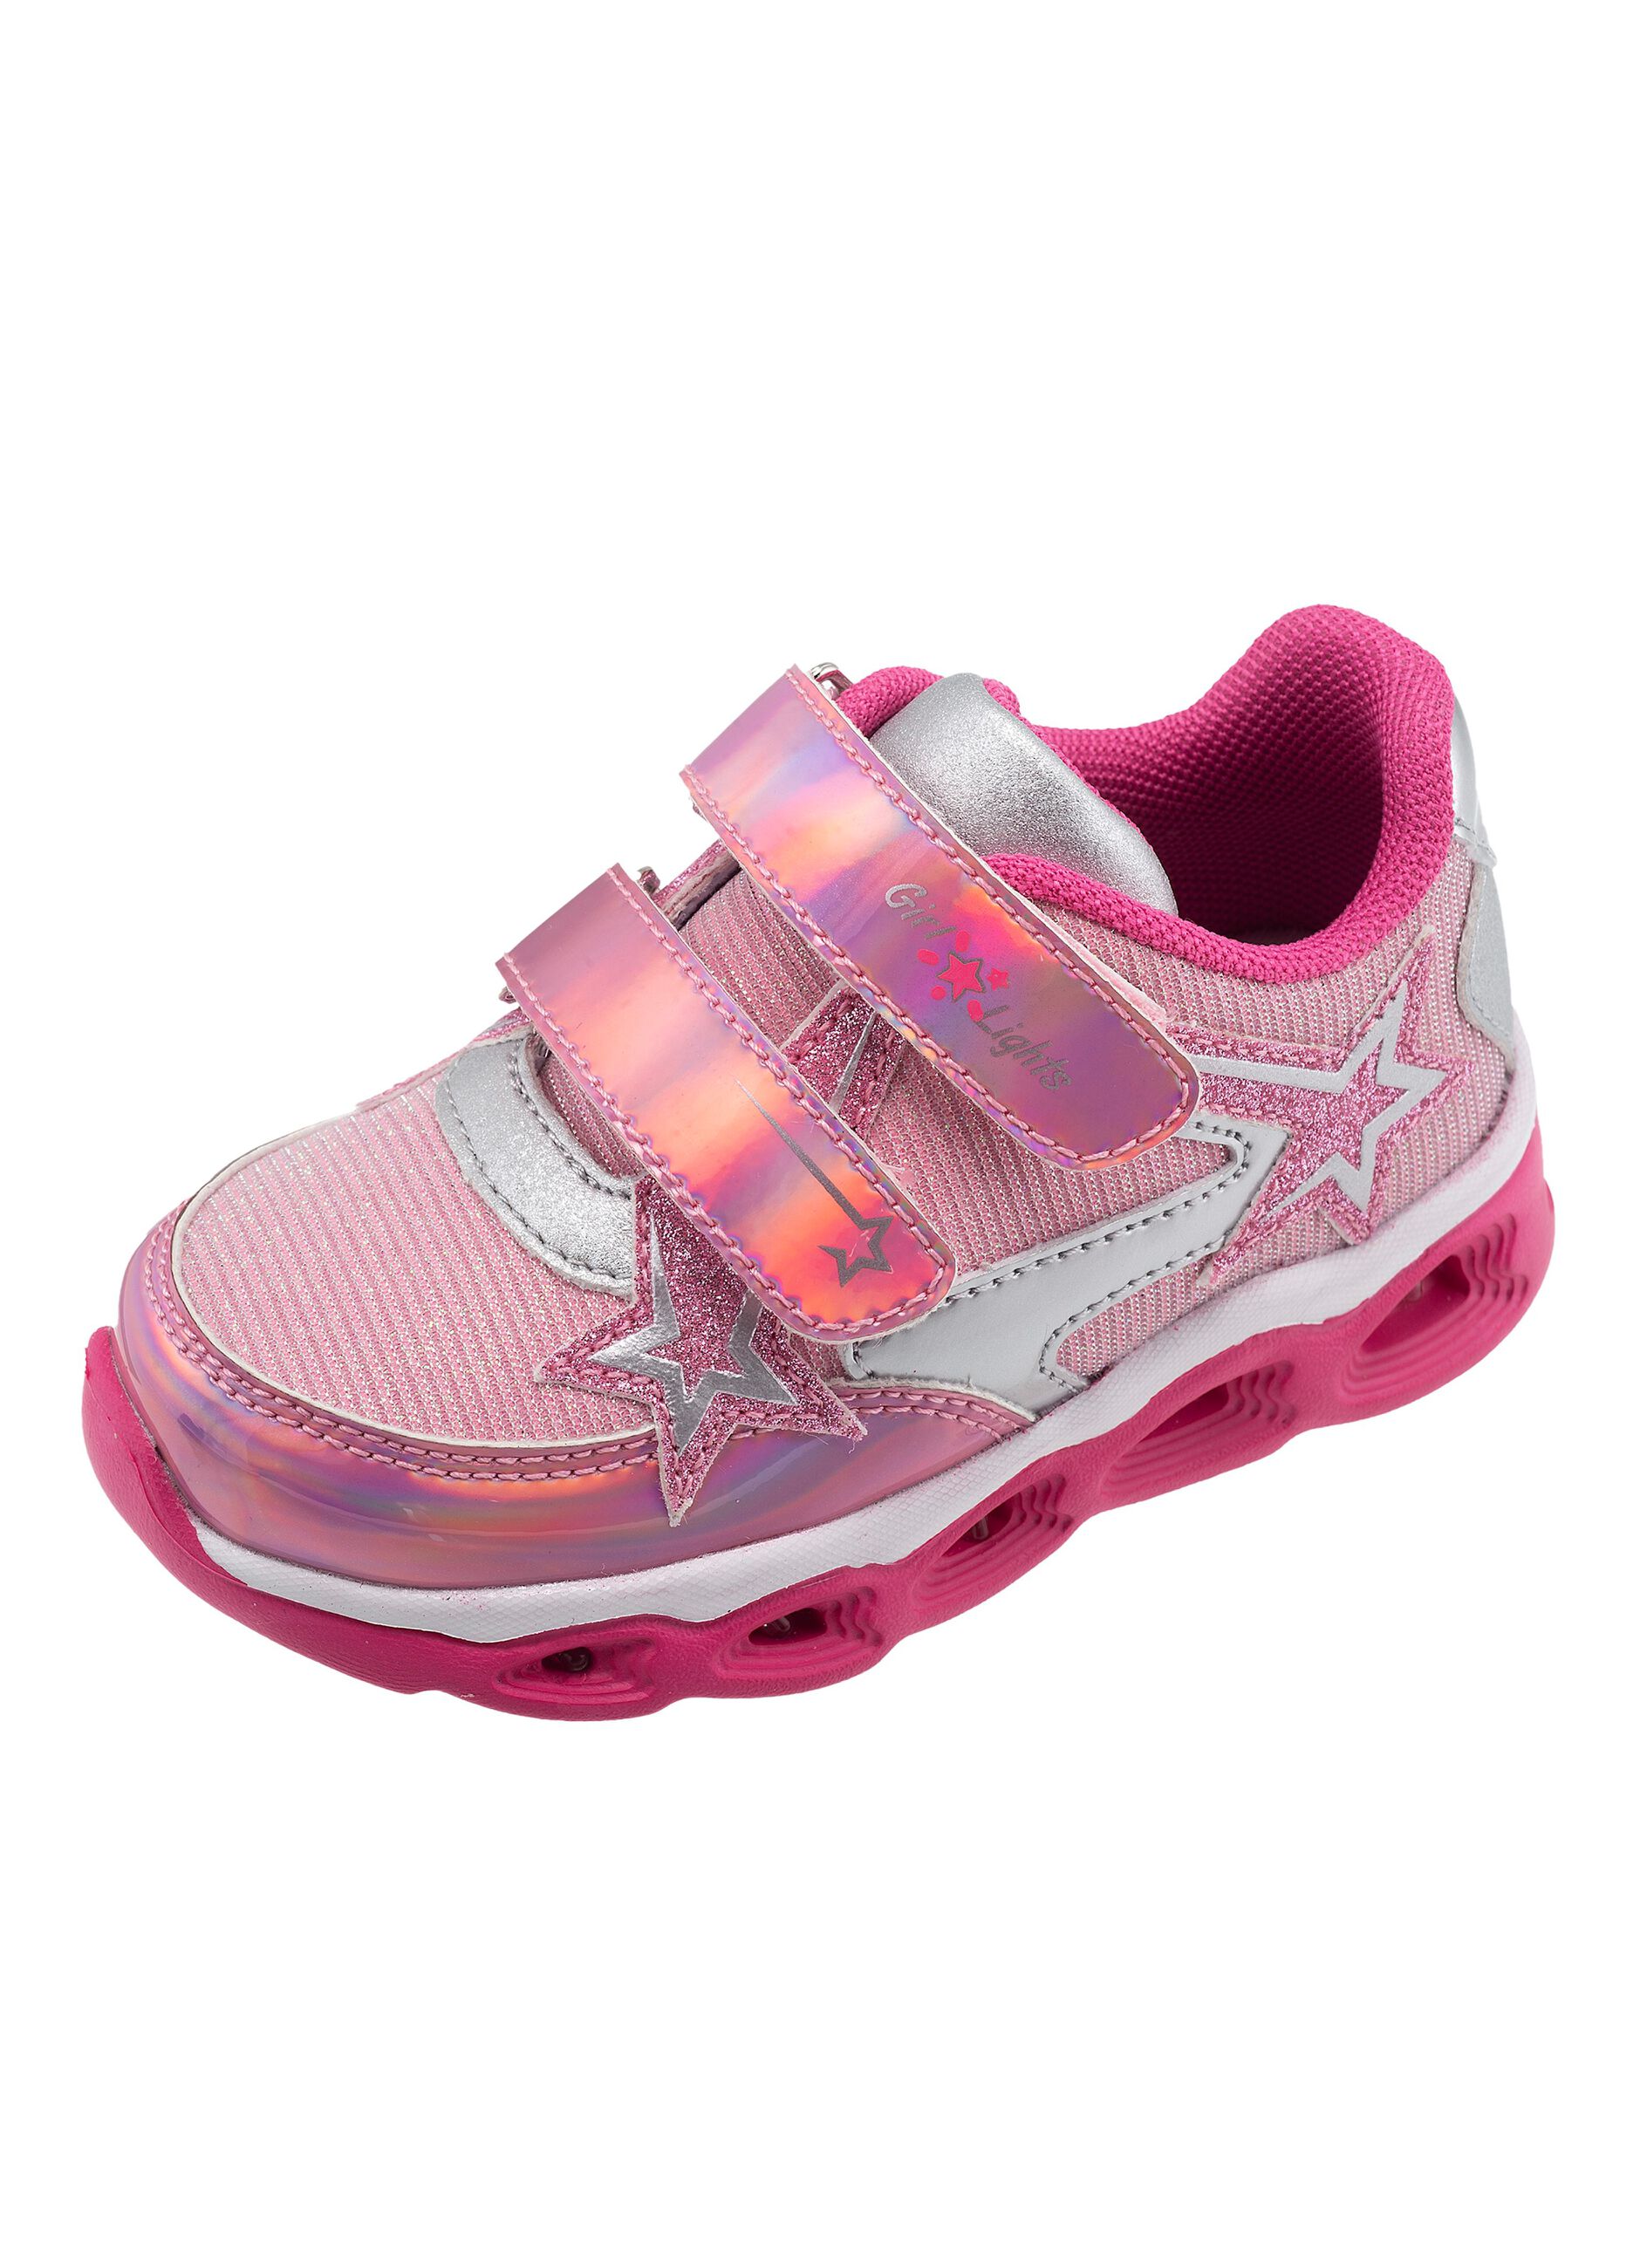 Chicco girls’ sneakers